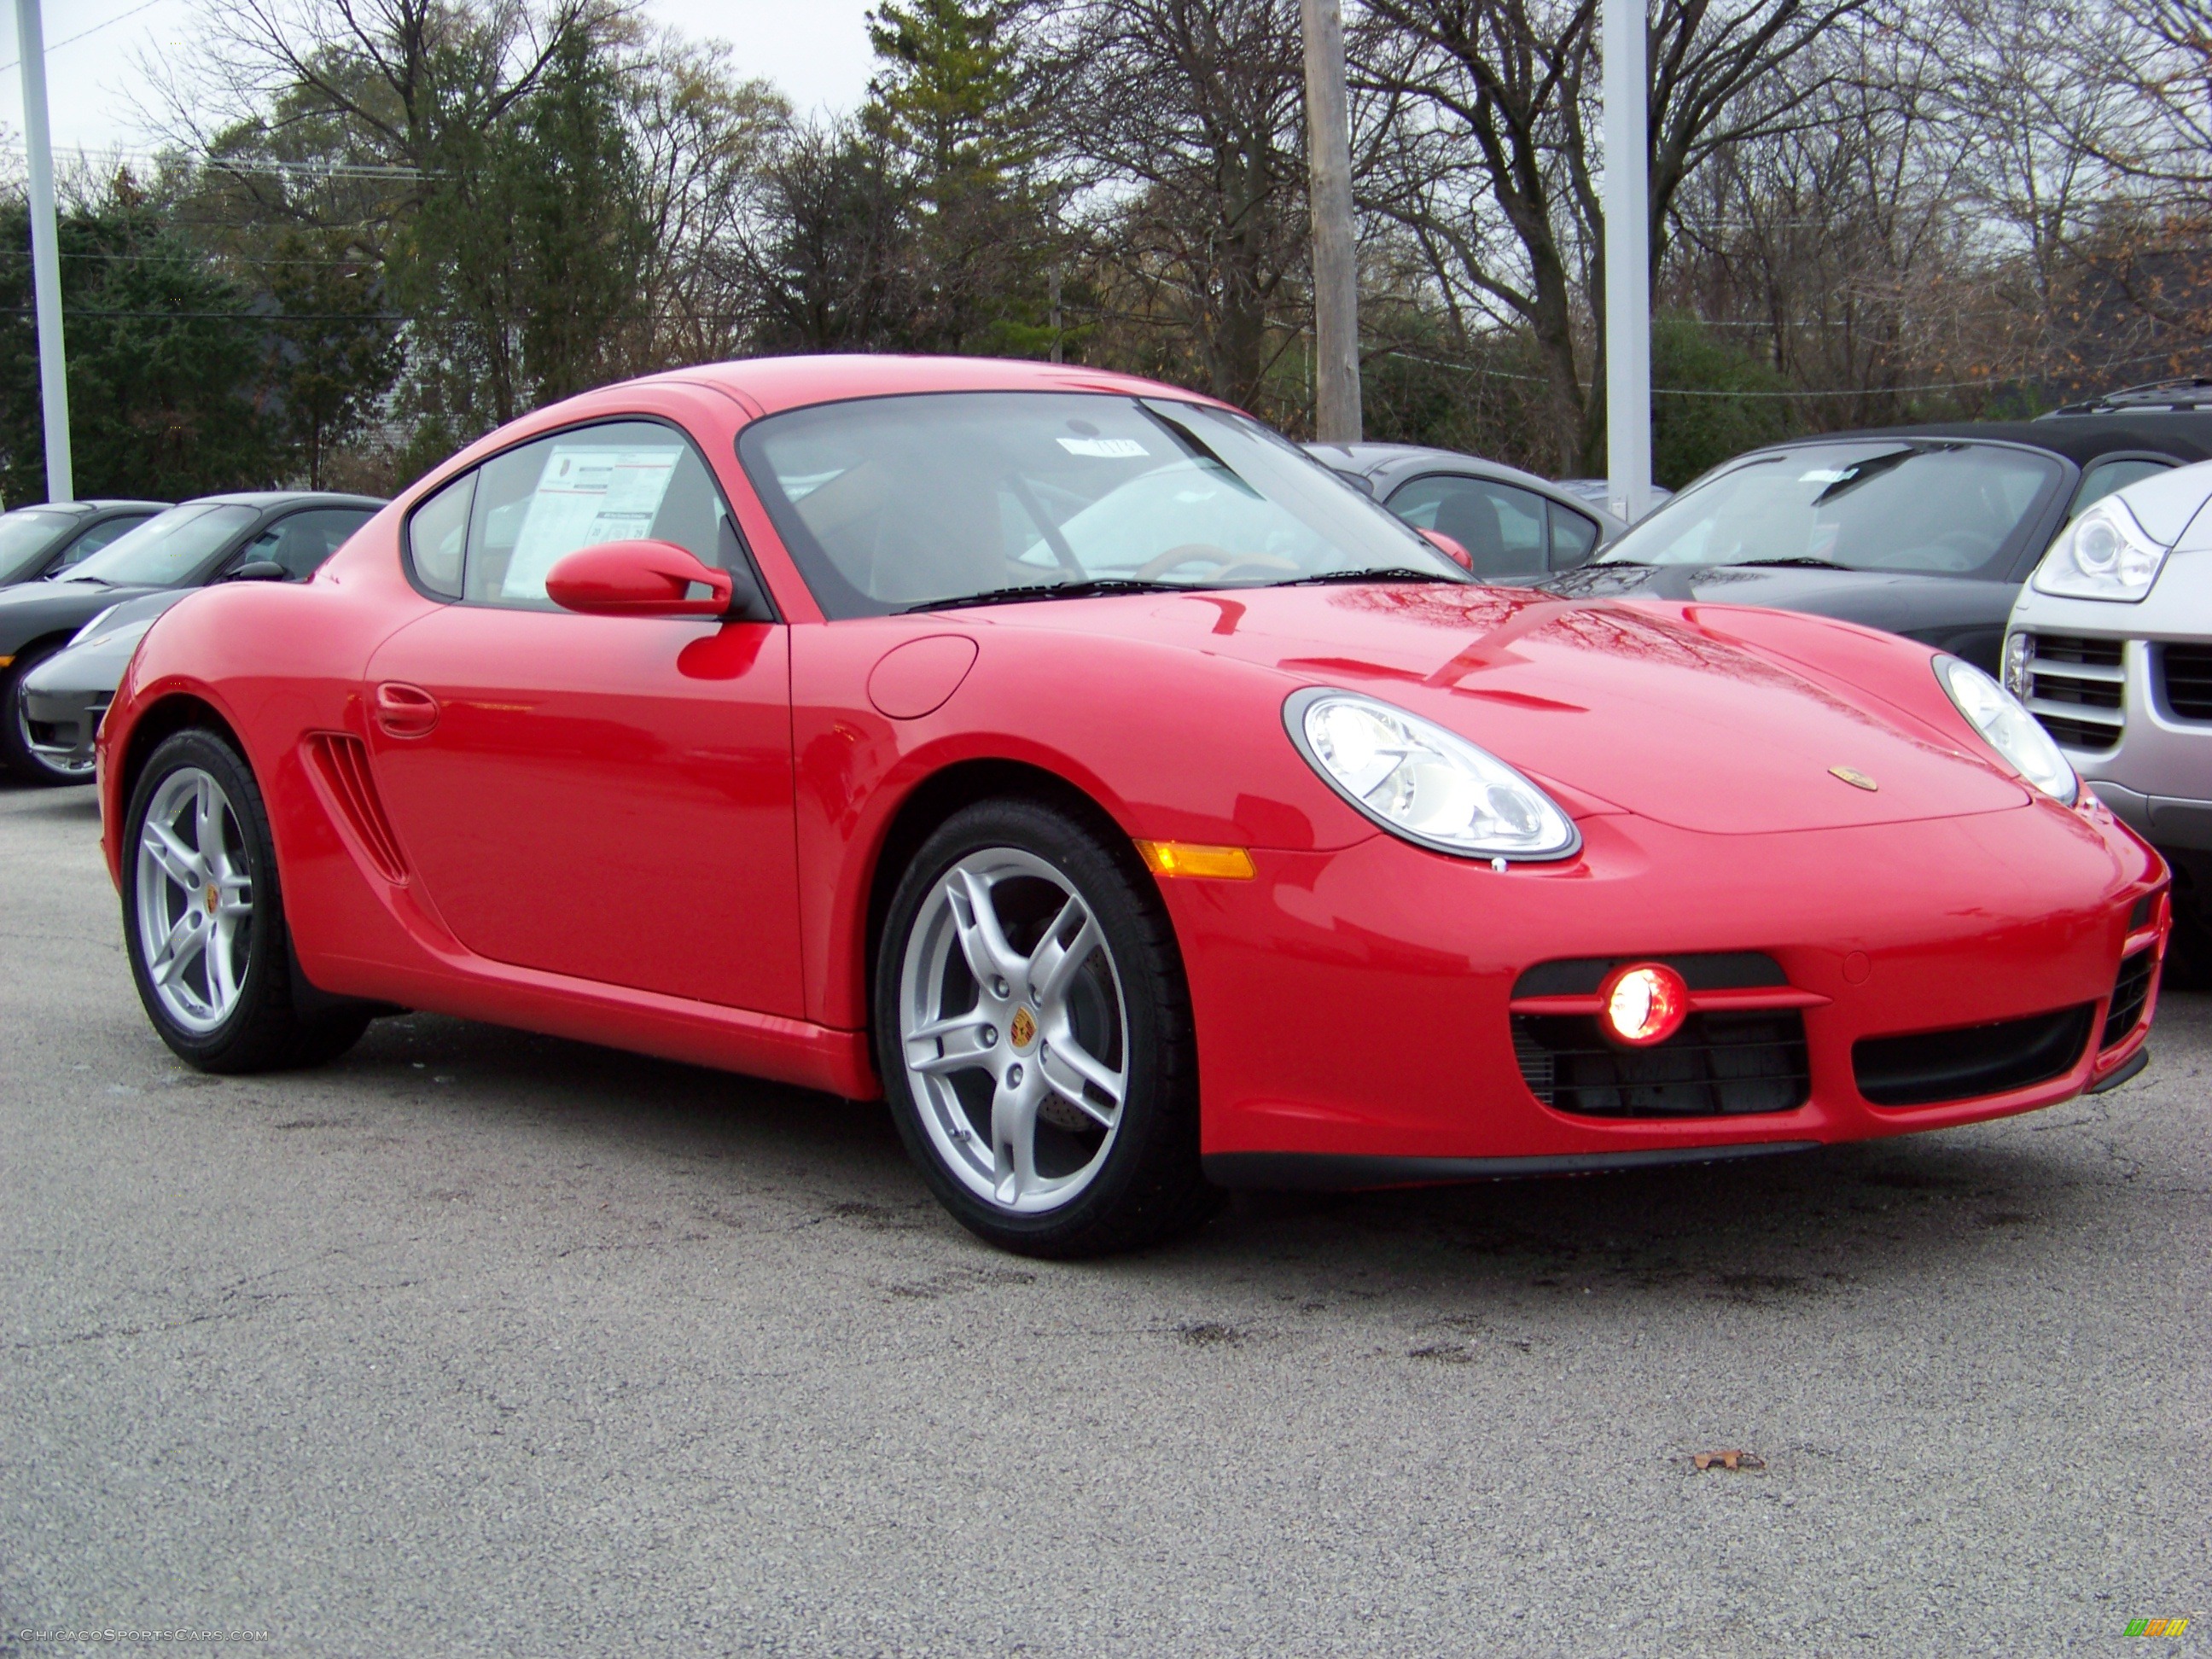 2008 Porsche Cayman in Guards Red photo 4 762654